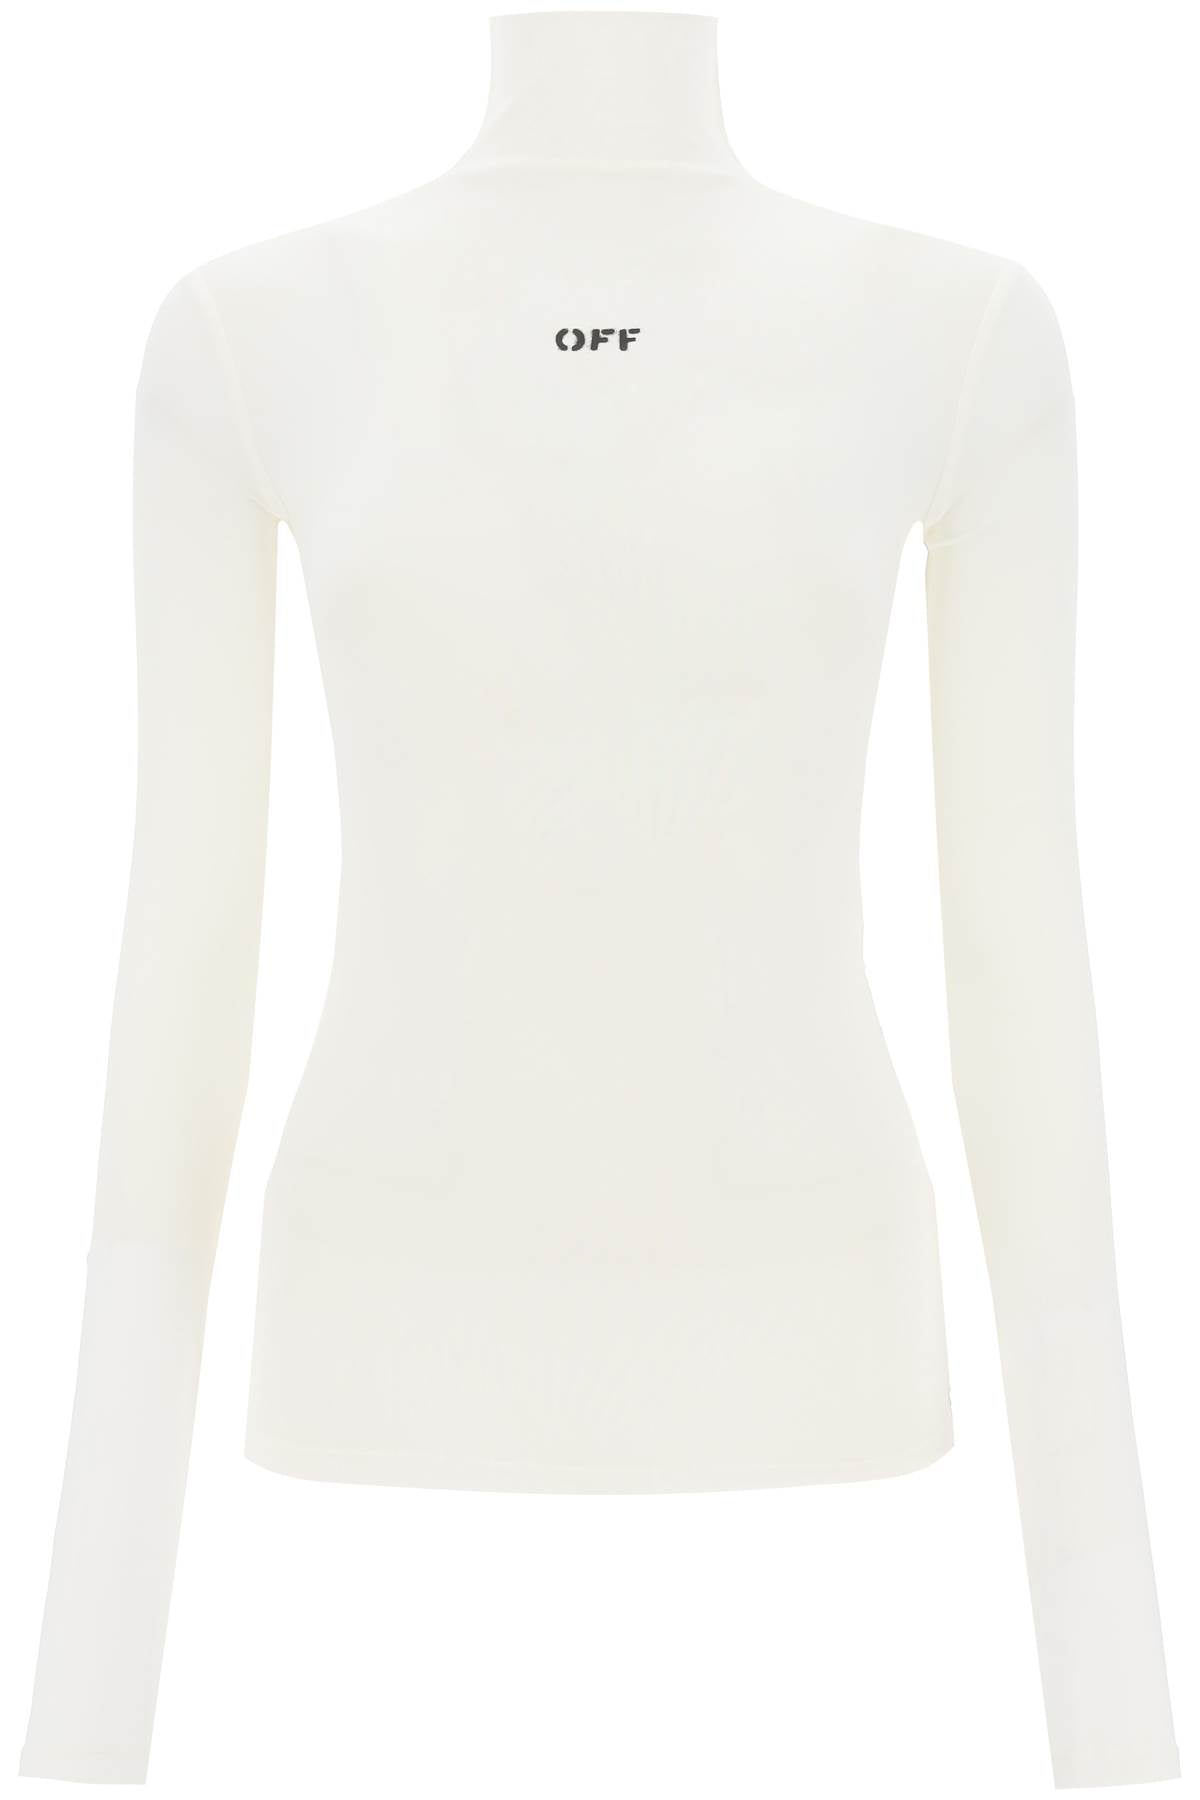 Off-white funnel-neck t-shirt with off logo OWAD122C99JER003 WHITE BLACK